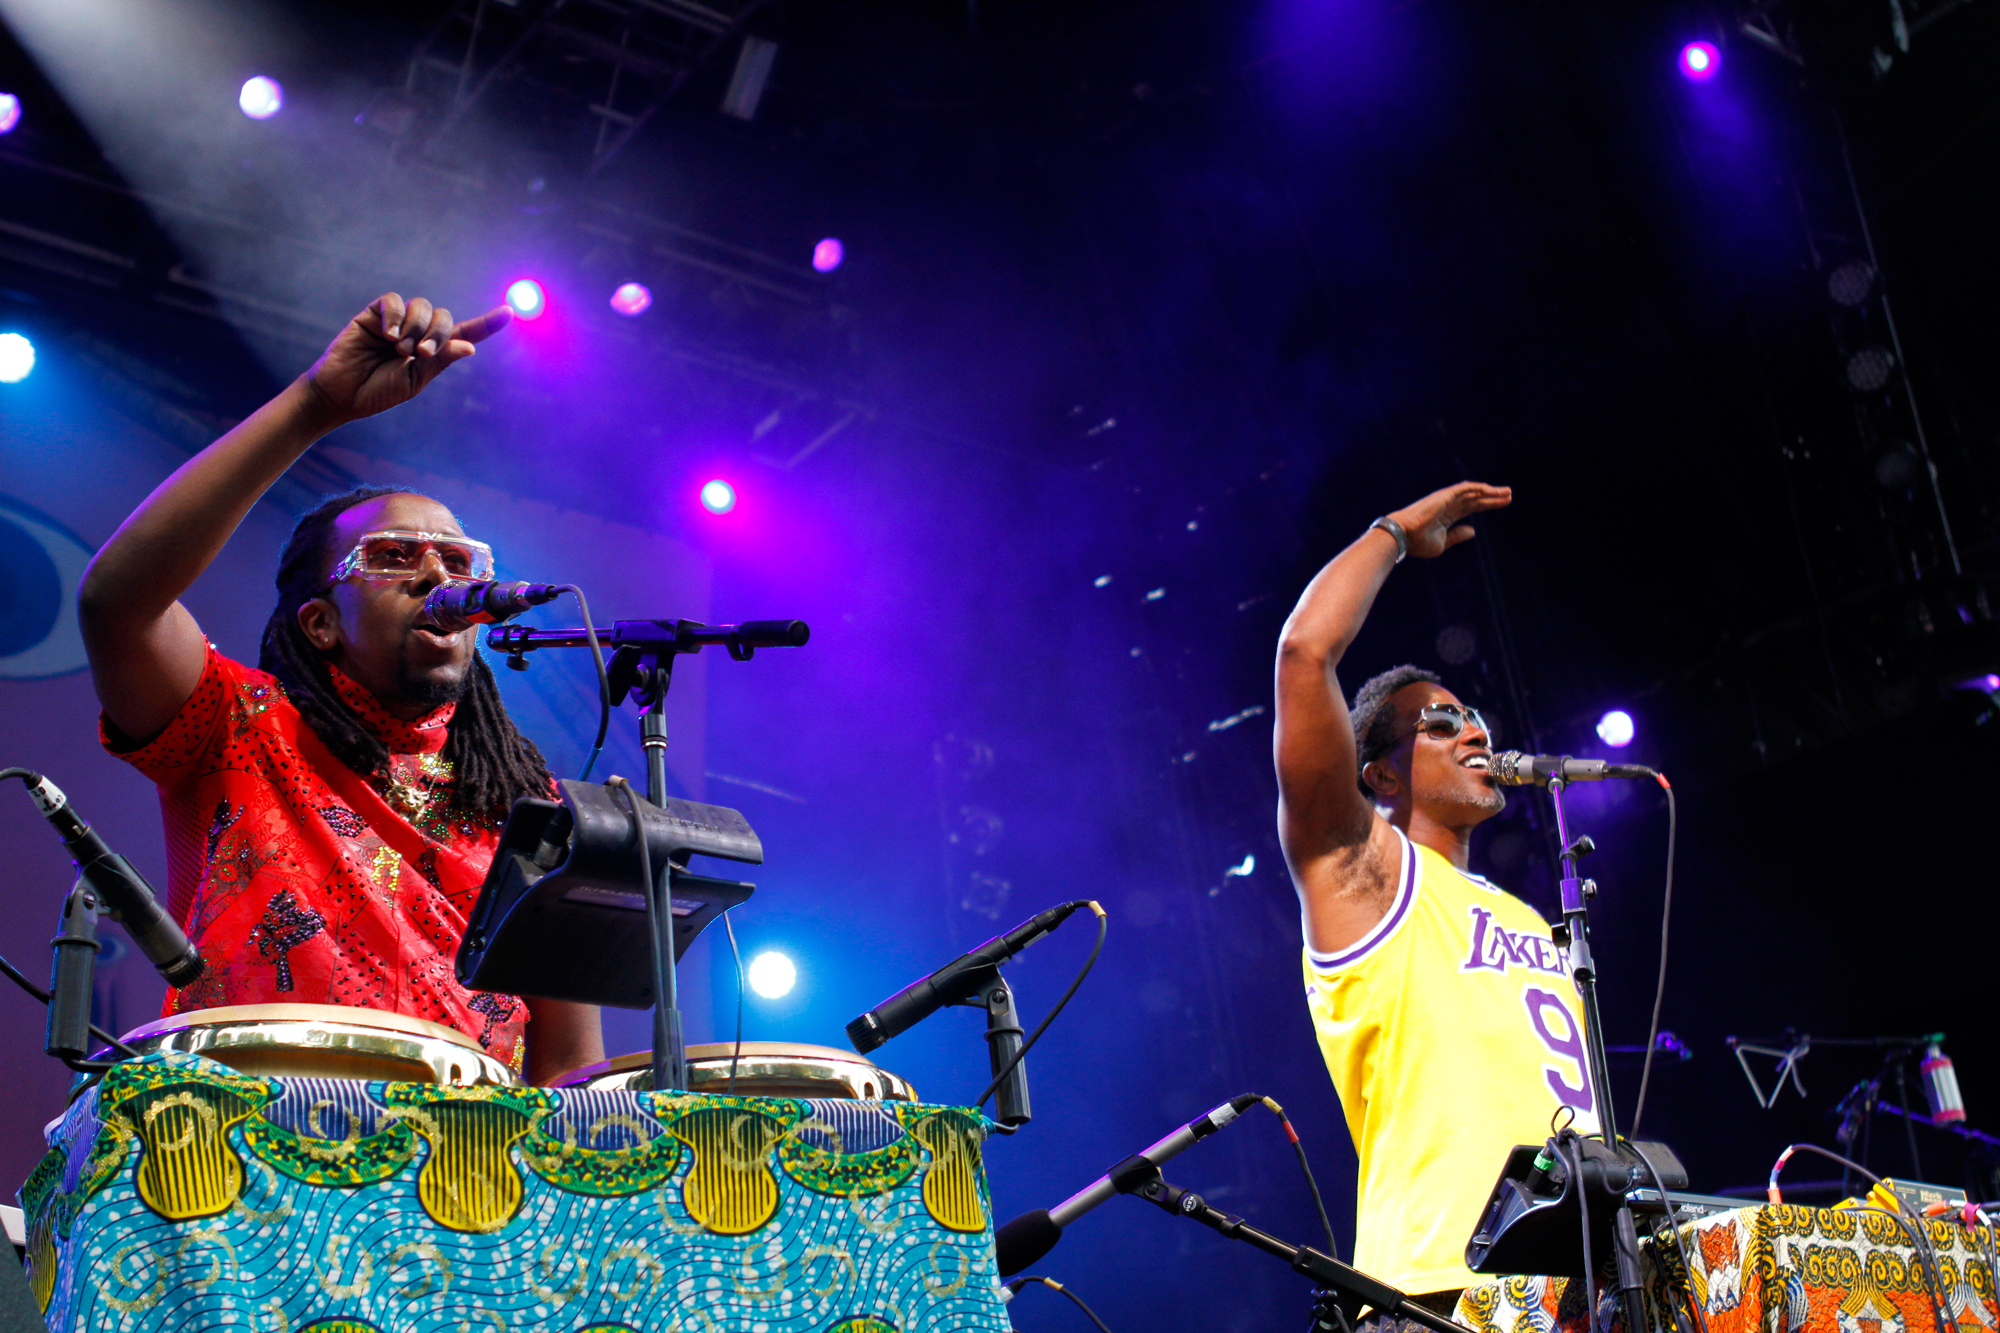 Shabazz Palaces performs at Celebrate Brooklyn at Prospect Park in Brooklyn, NY on Aug. 8, 2015. (© Michael Katzif – Do not use or republish without prior consent.)